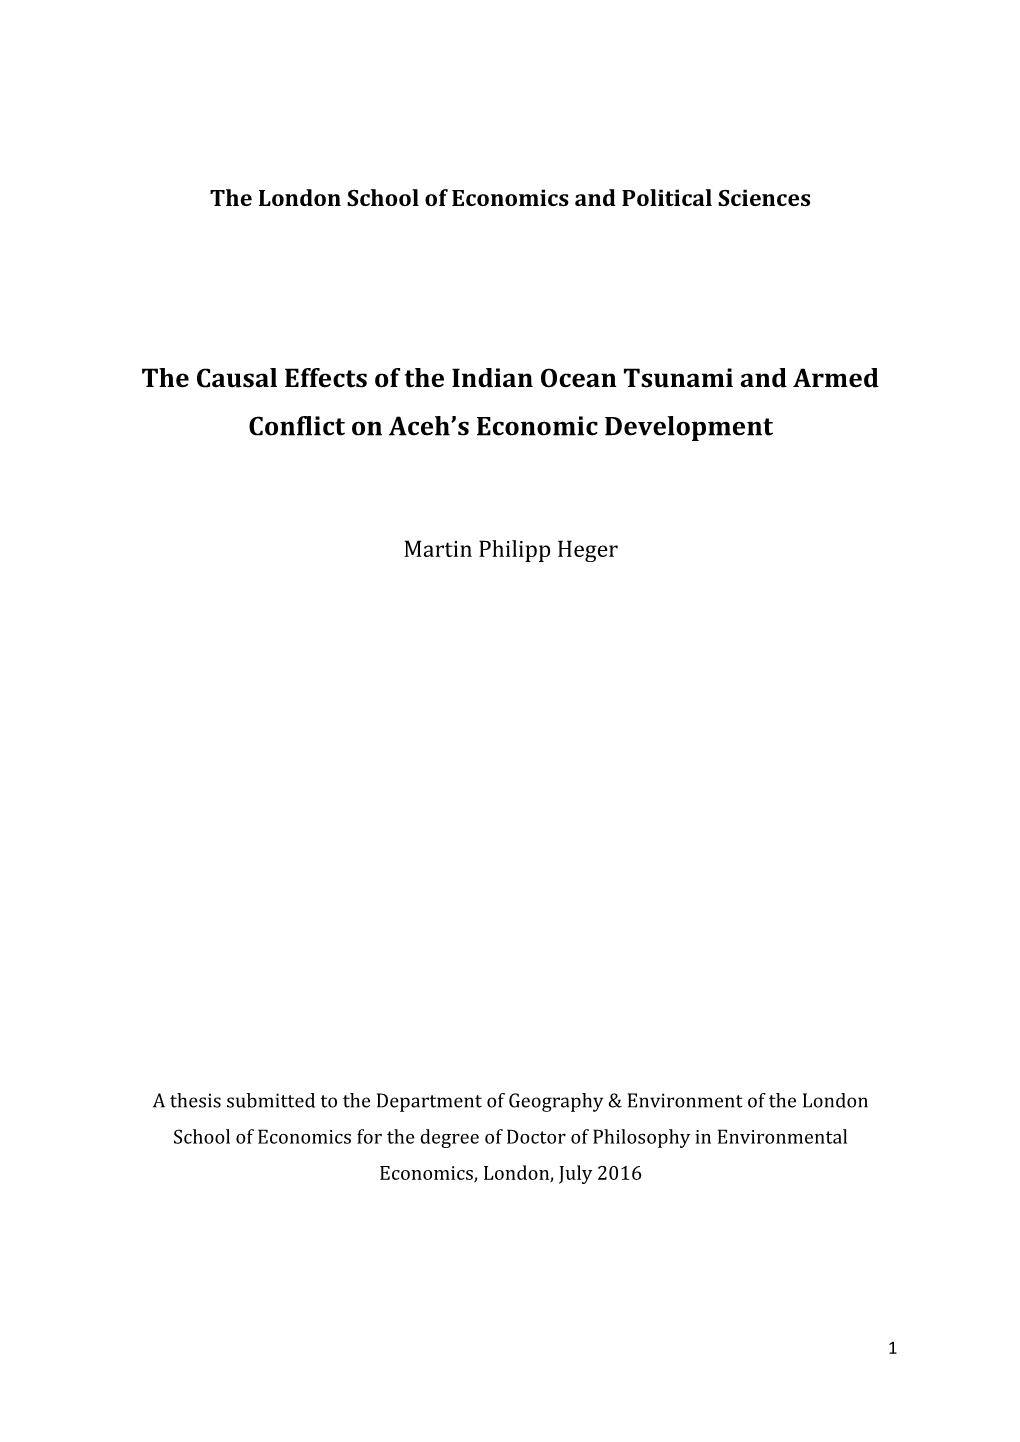 The Causal Effects of the Indian Ocean Tsunami and Armed Conflict on Aceh’S Economic Development